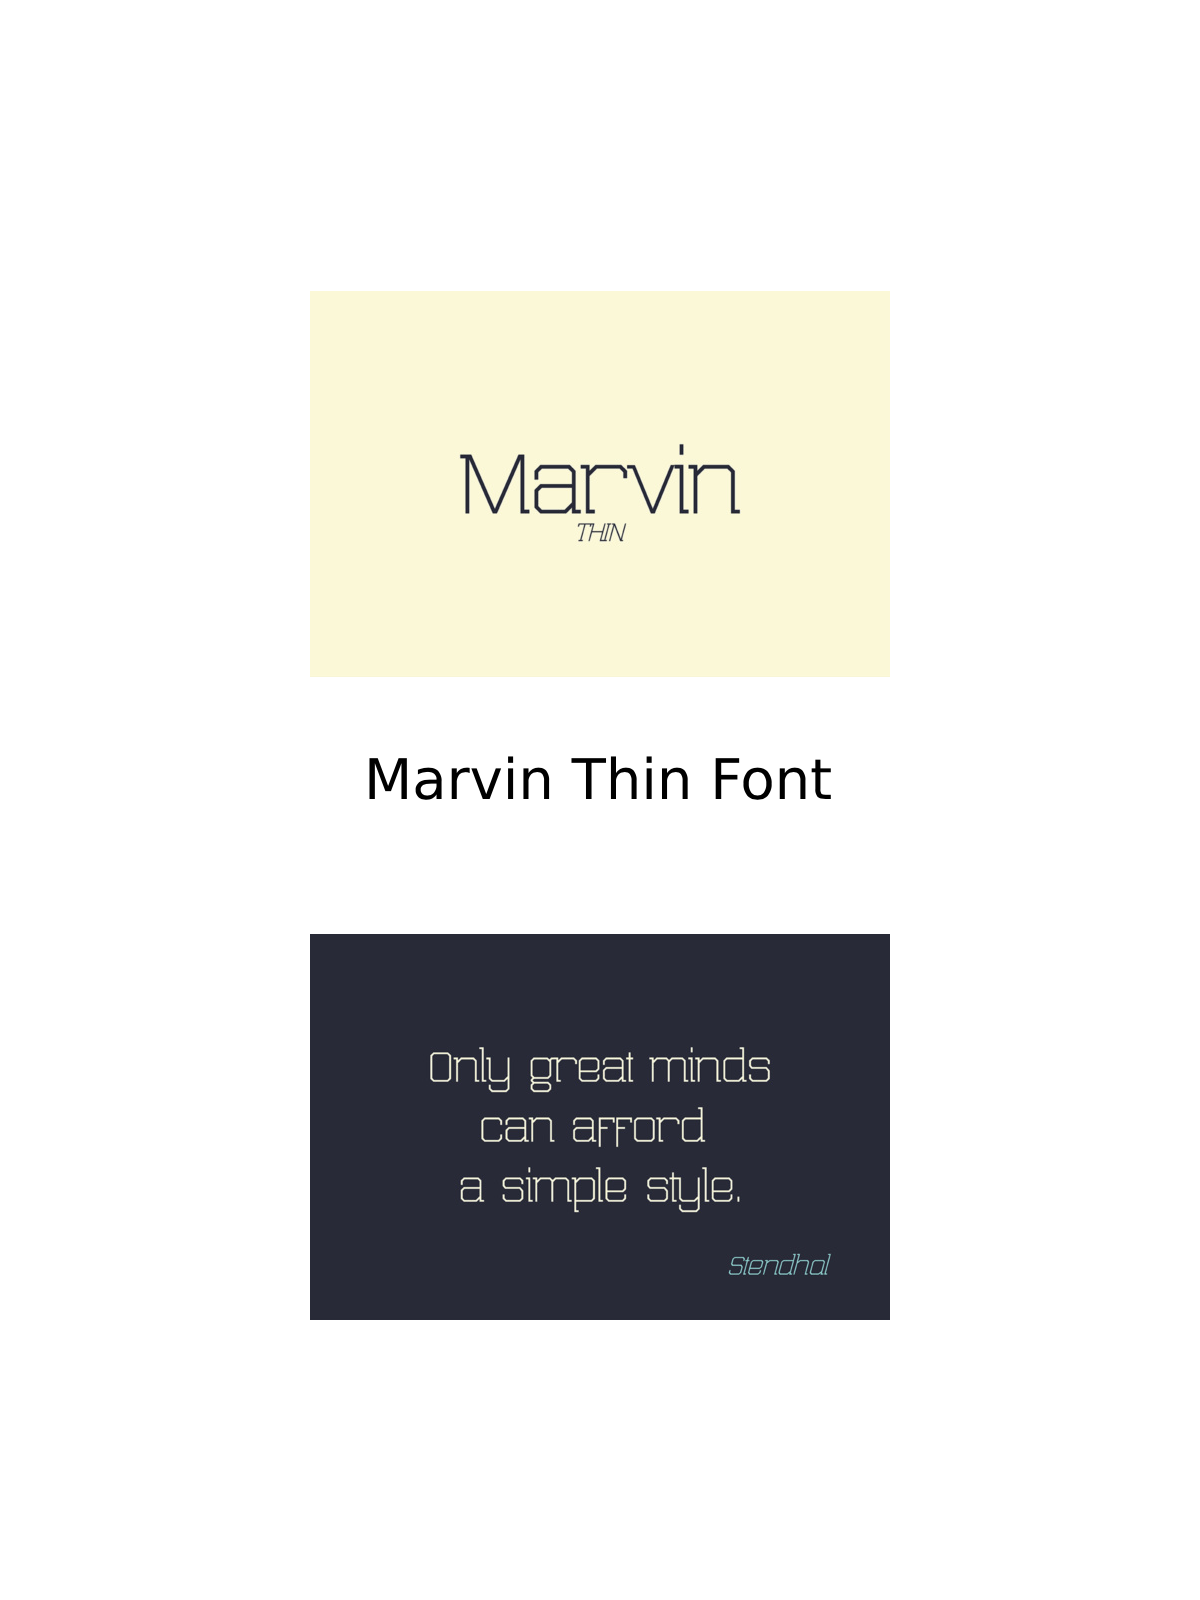 Marvin thin font pinterest image preview.